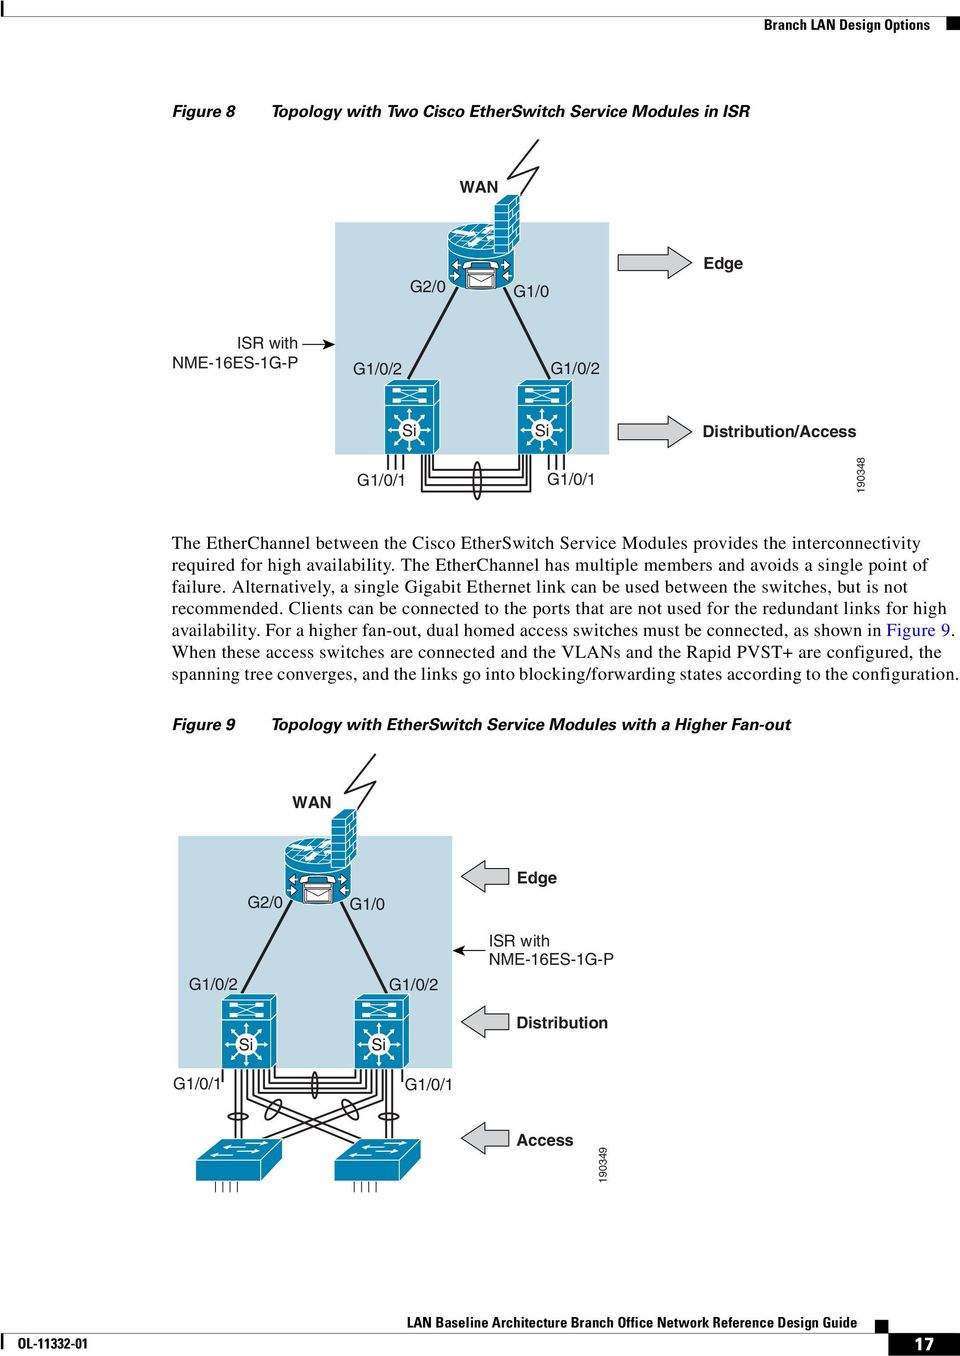 The EtherChannel has multiple members and avoids a single point of failure. Alternatively, a single Gigabit Ethernet link can be used between the switches, but is not recommended.